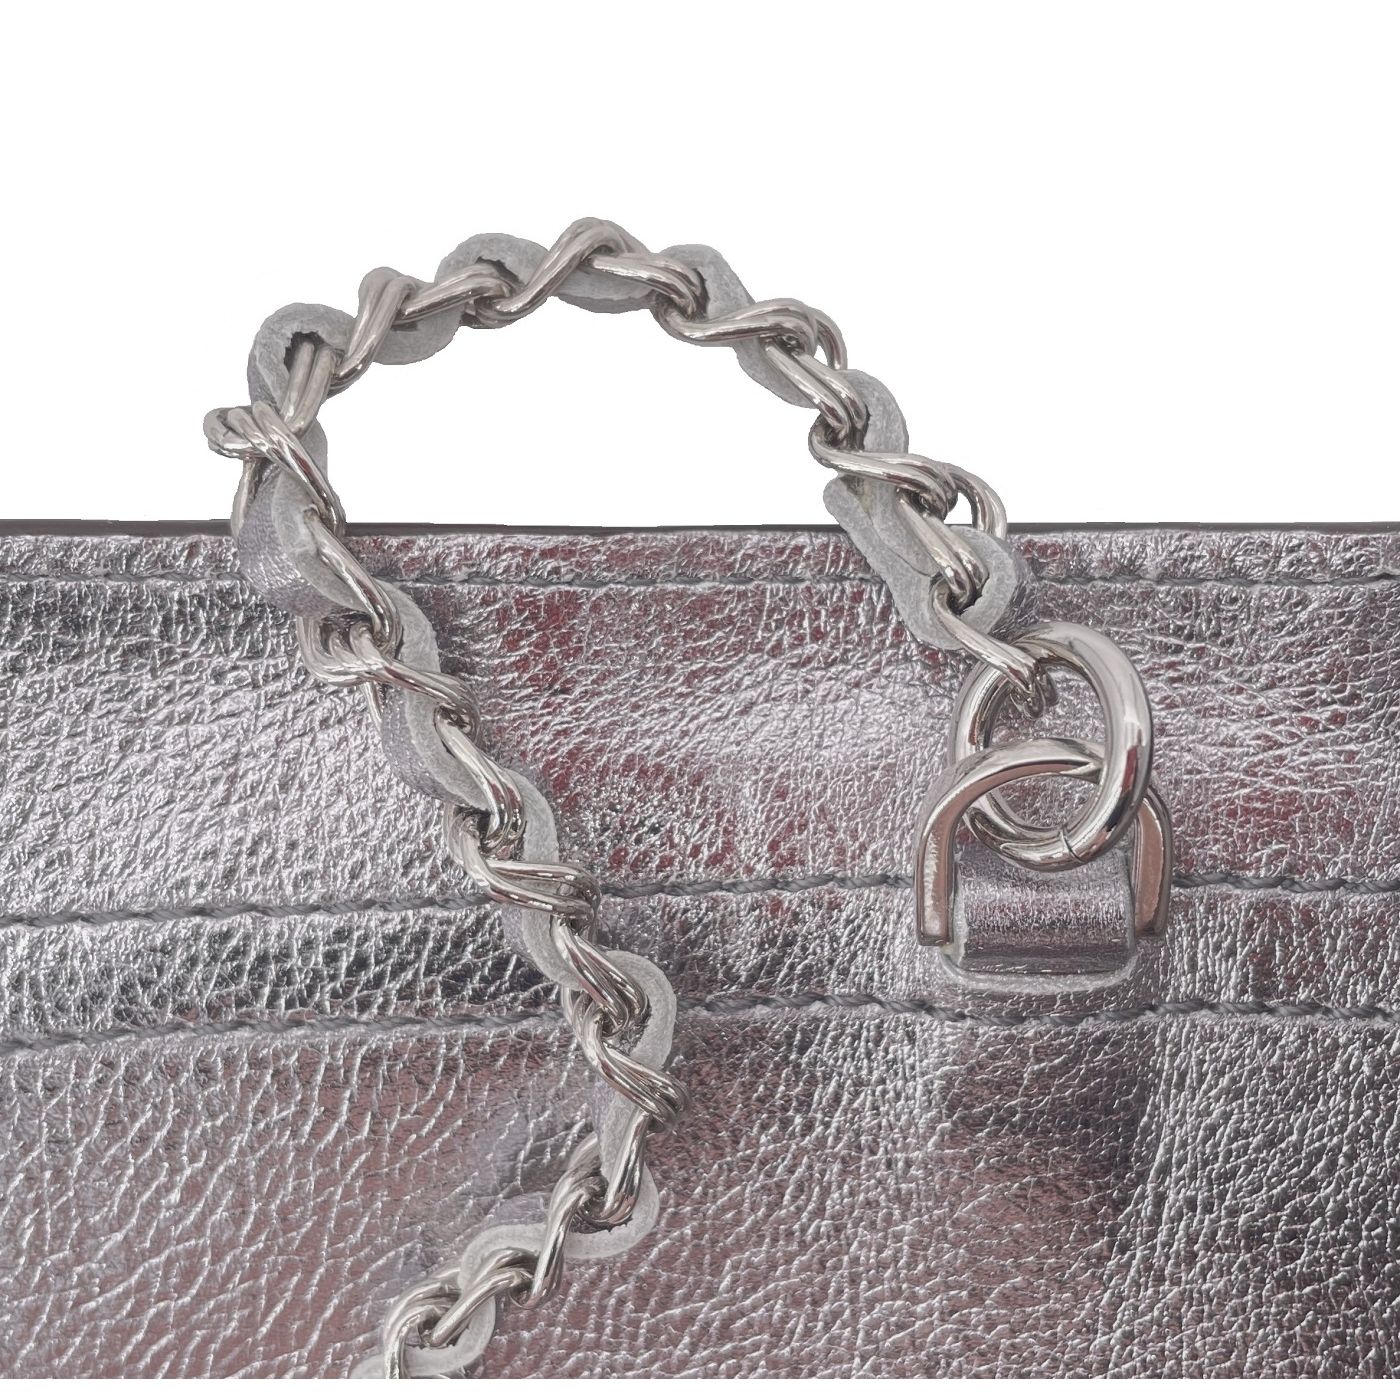 Crossbody Bag in Silver Leather Jeanne PM Delage